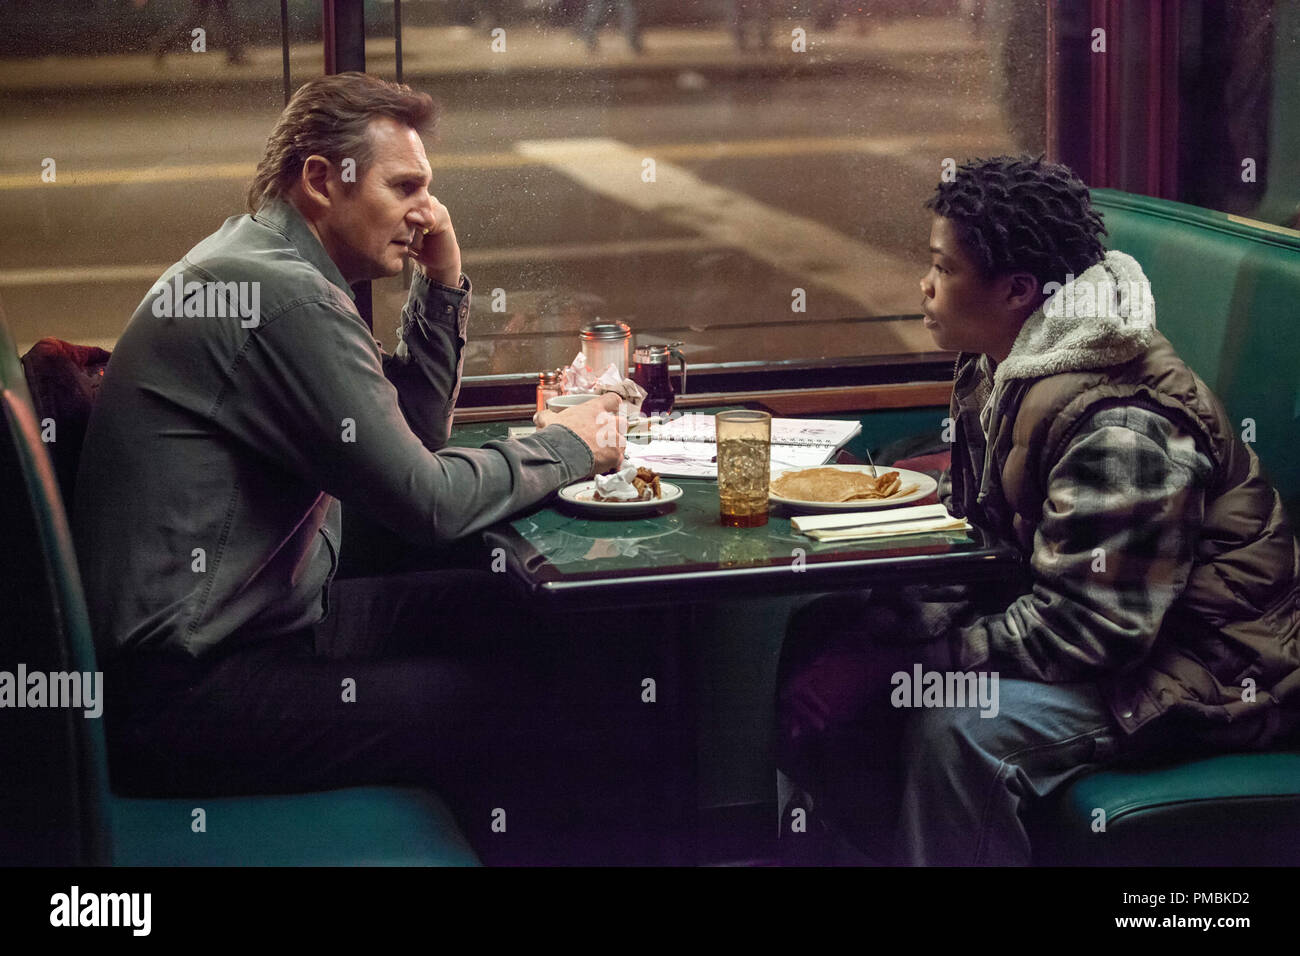 (L to R) Matt Scudder (LIAM NEESON) discusses the case with TJ (BRIAN 'ASTRO' BRADLEY) in 'A Walk among the Tombstones' Stock Photo